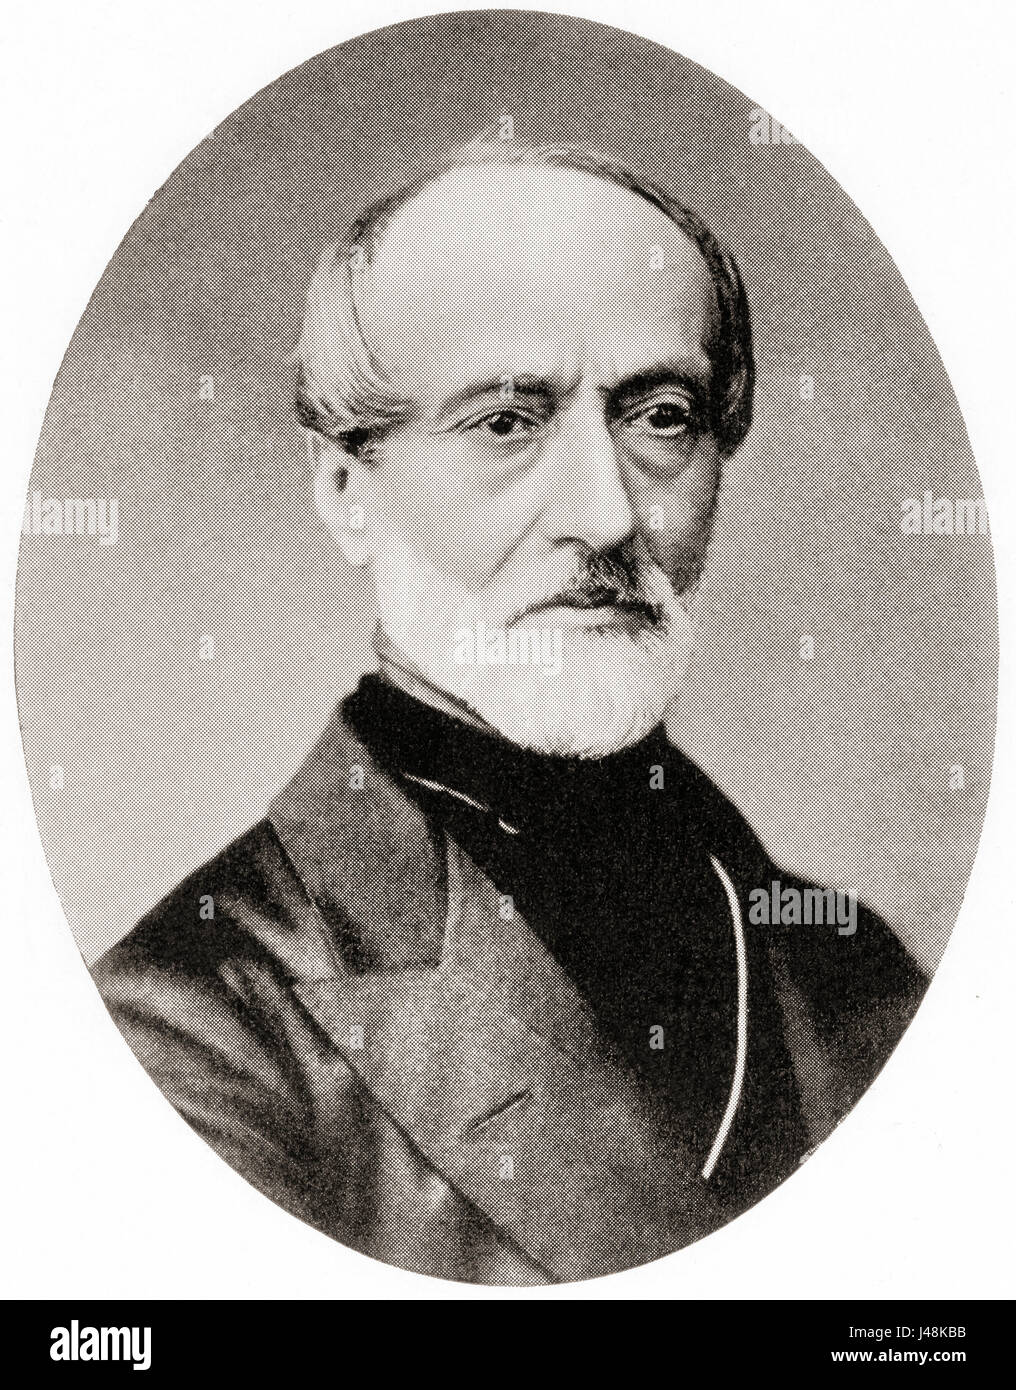 Giuseppe Mazzini, 1805 – 1872.  Italian politician, journalist and activist for the unification of Italy.  From Hutchinson's History of the Nations, published 1915. Stock Photo